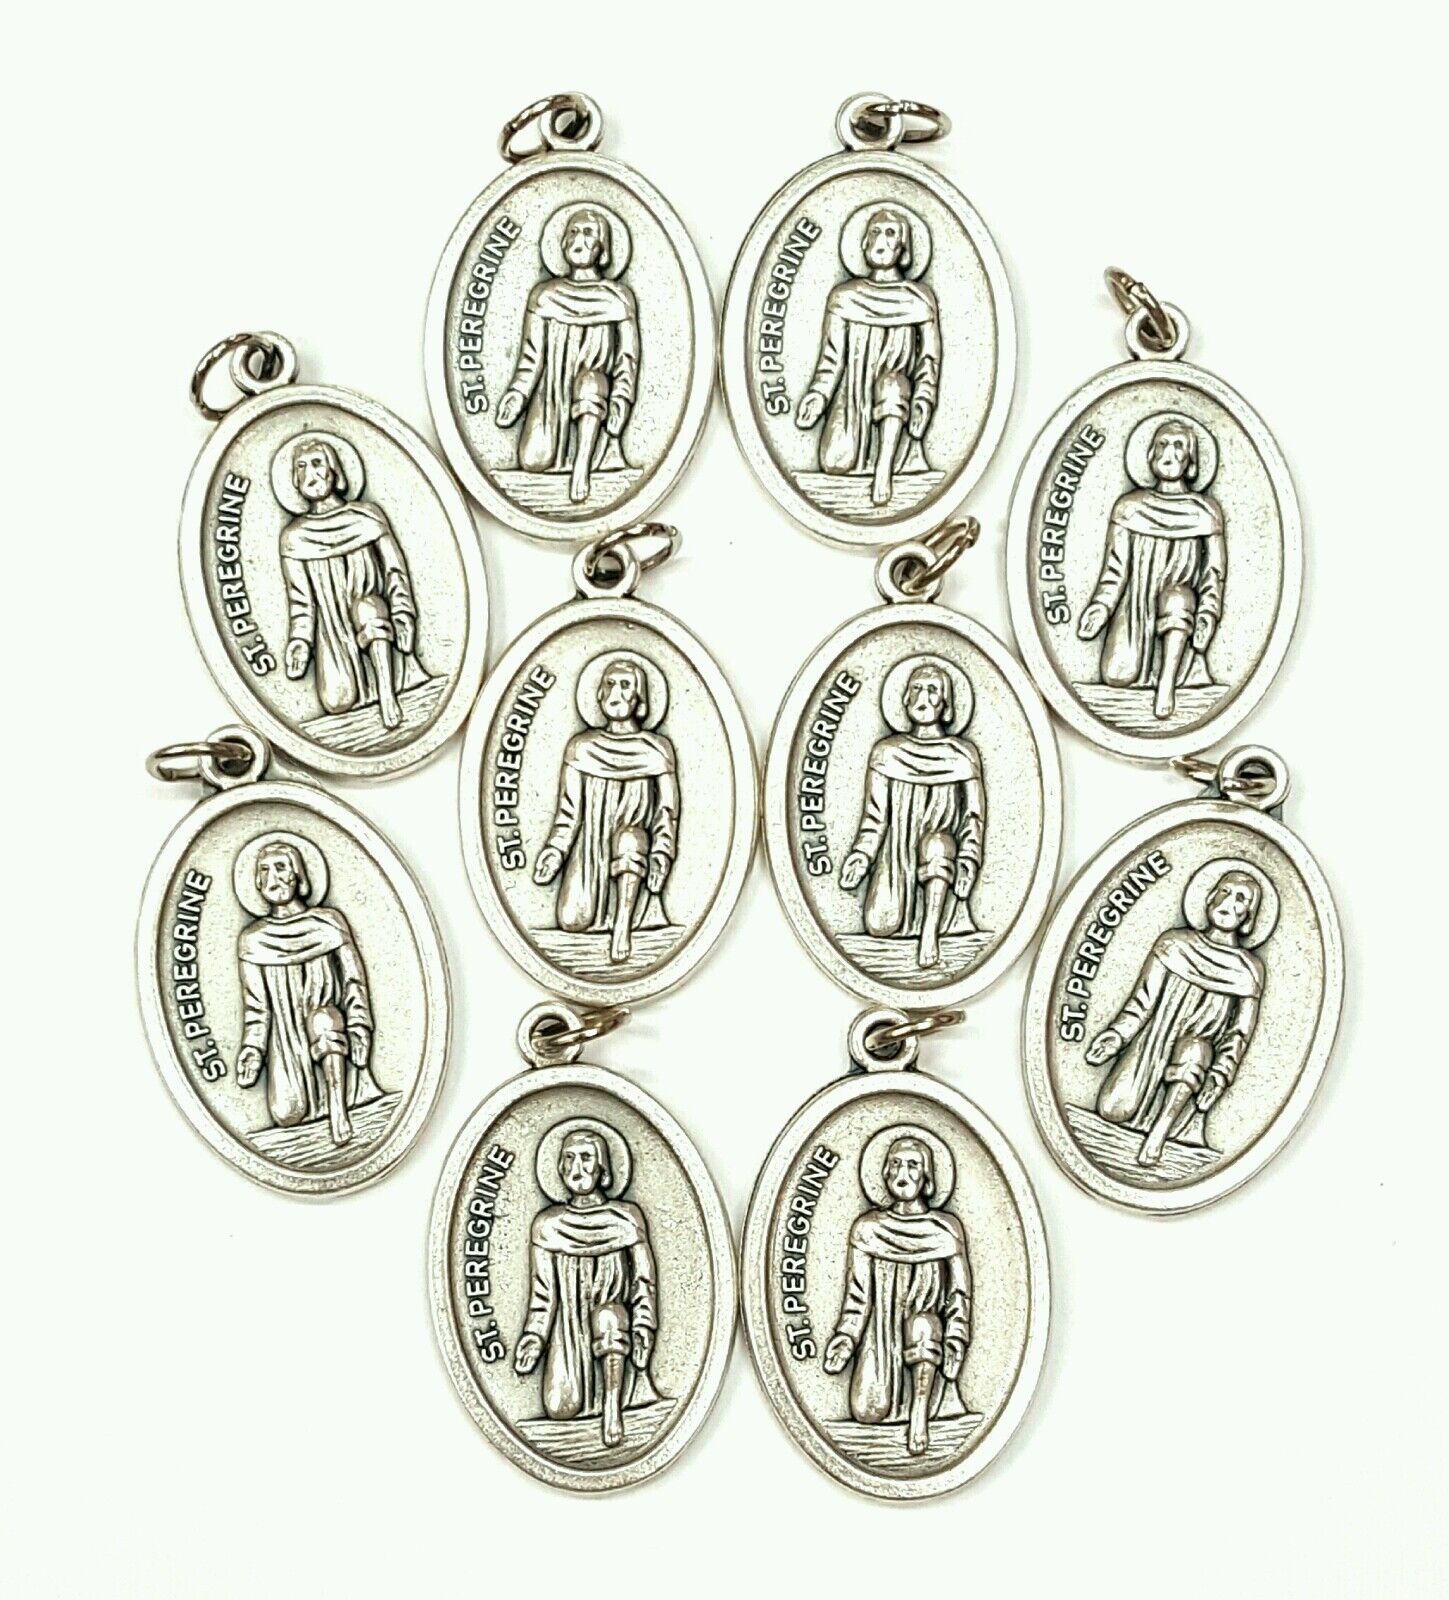 10 pcs. Saint Peregrine Medals Patron Saint Cancer-Blessed by Pope upon request